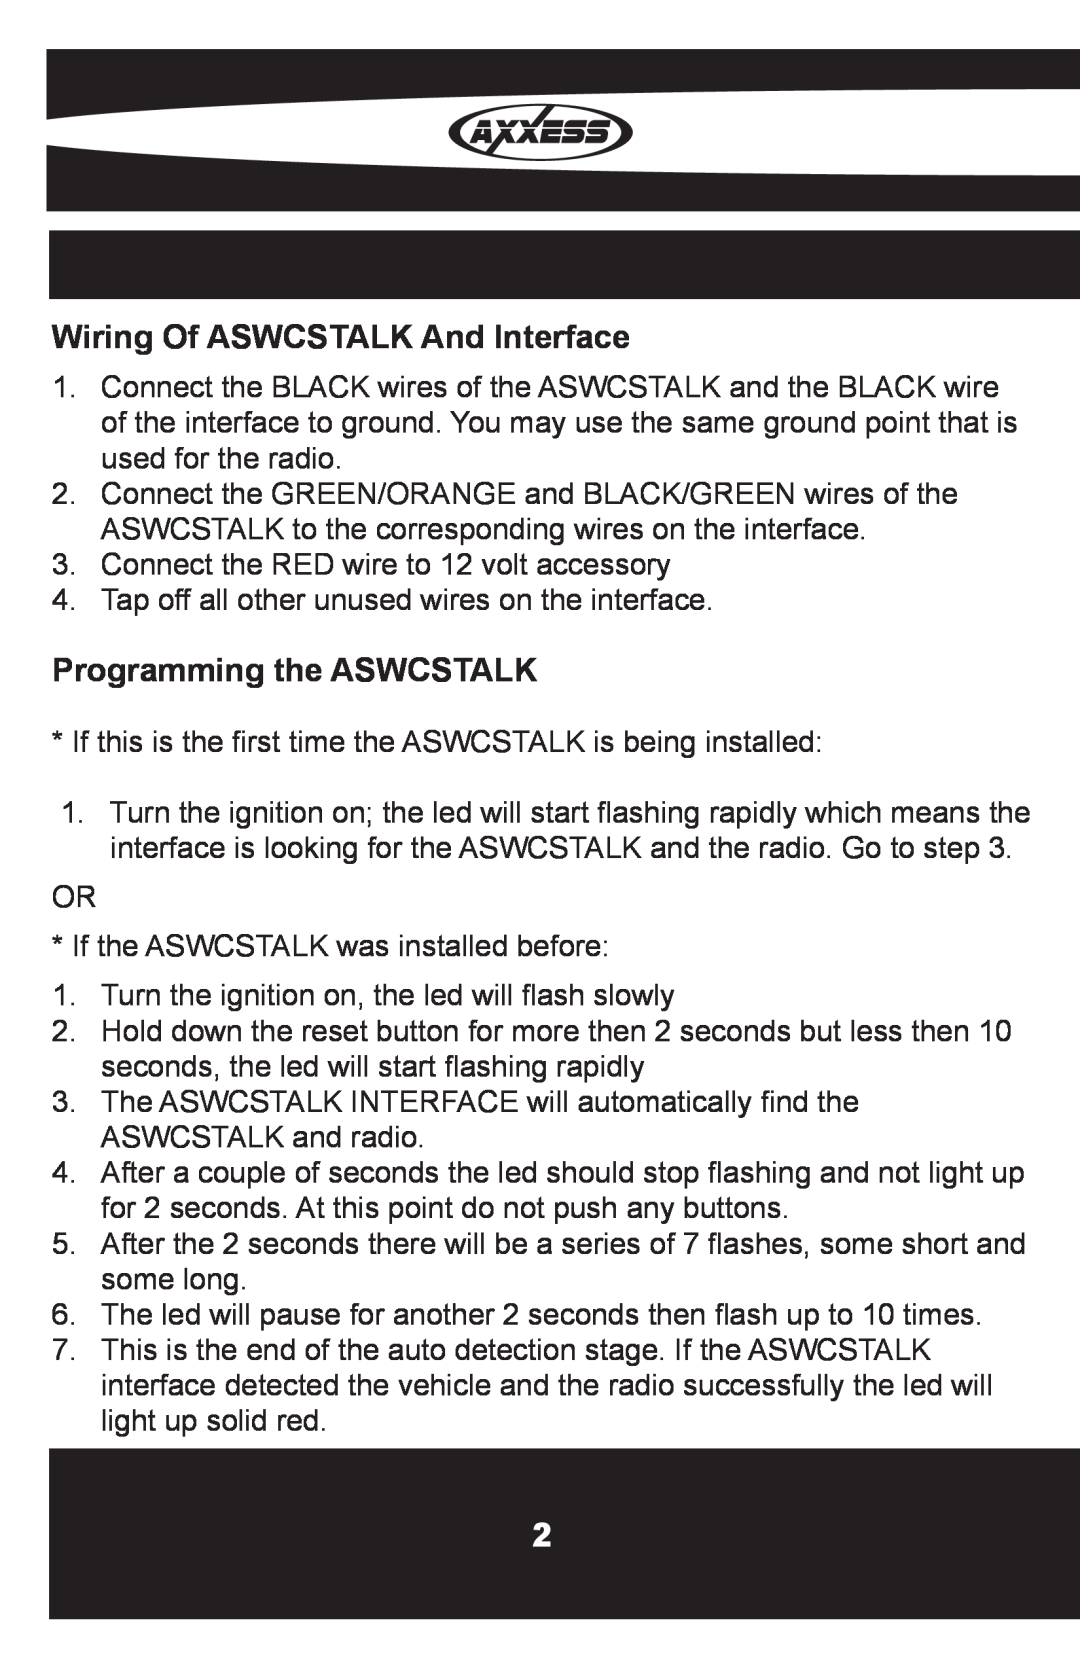 Metra Electronics OESWC-6502-STK installation instructions Wiring Of ASWCSTALK And Interface, Programming the ASWCSTALK 